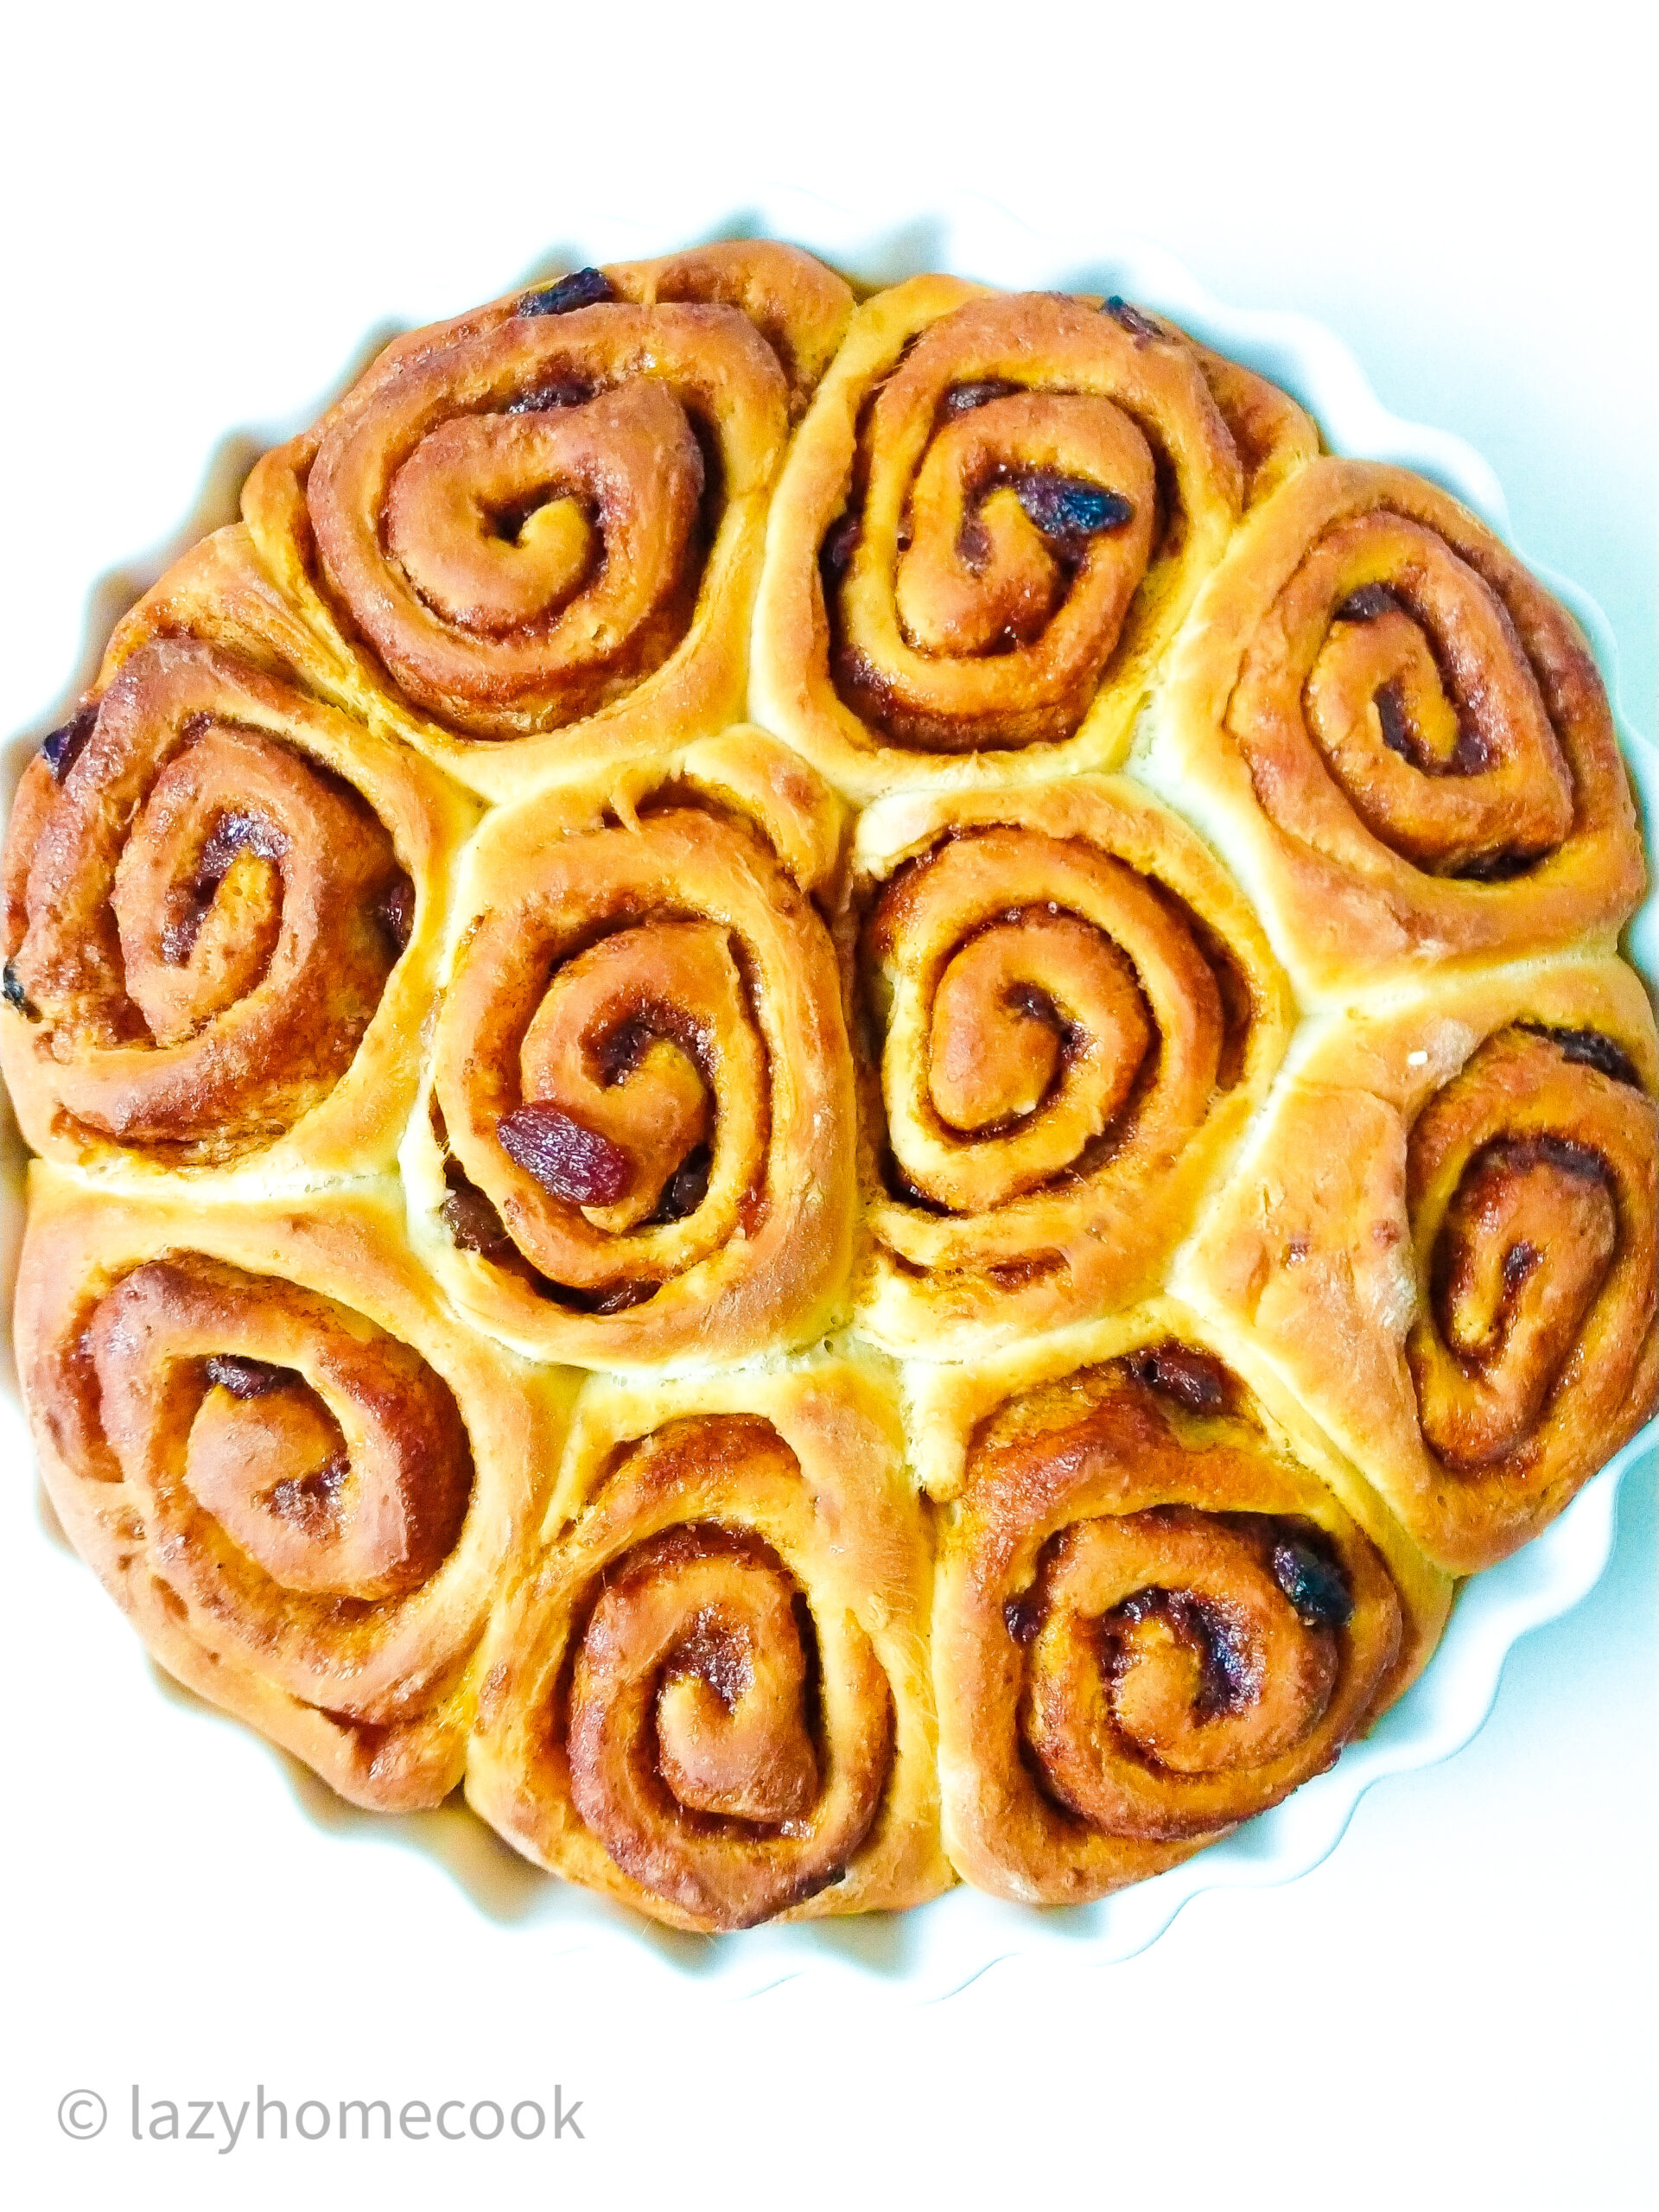 Homemade cinnamon roll recipe (only one rise!)